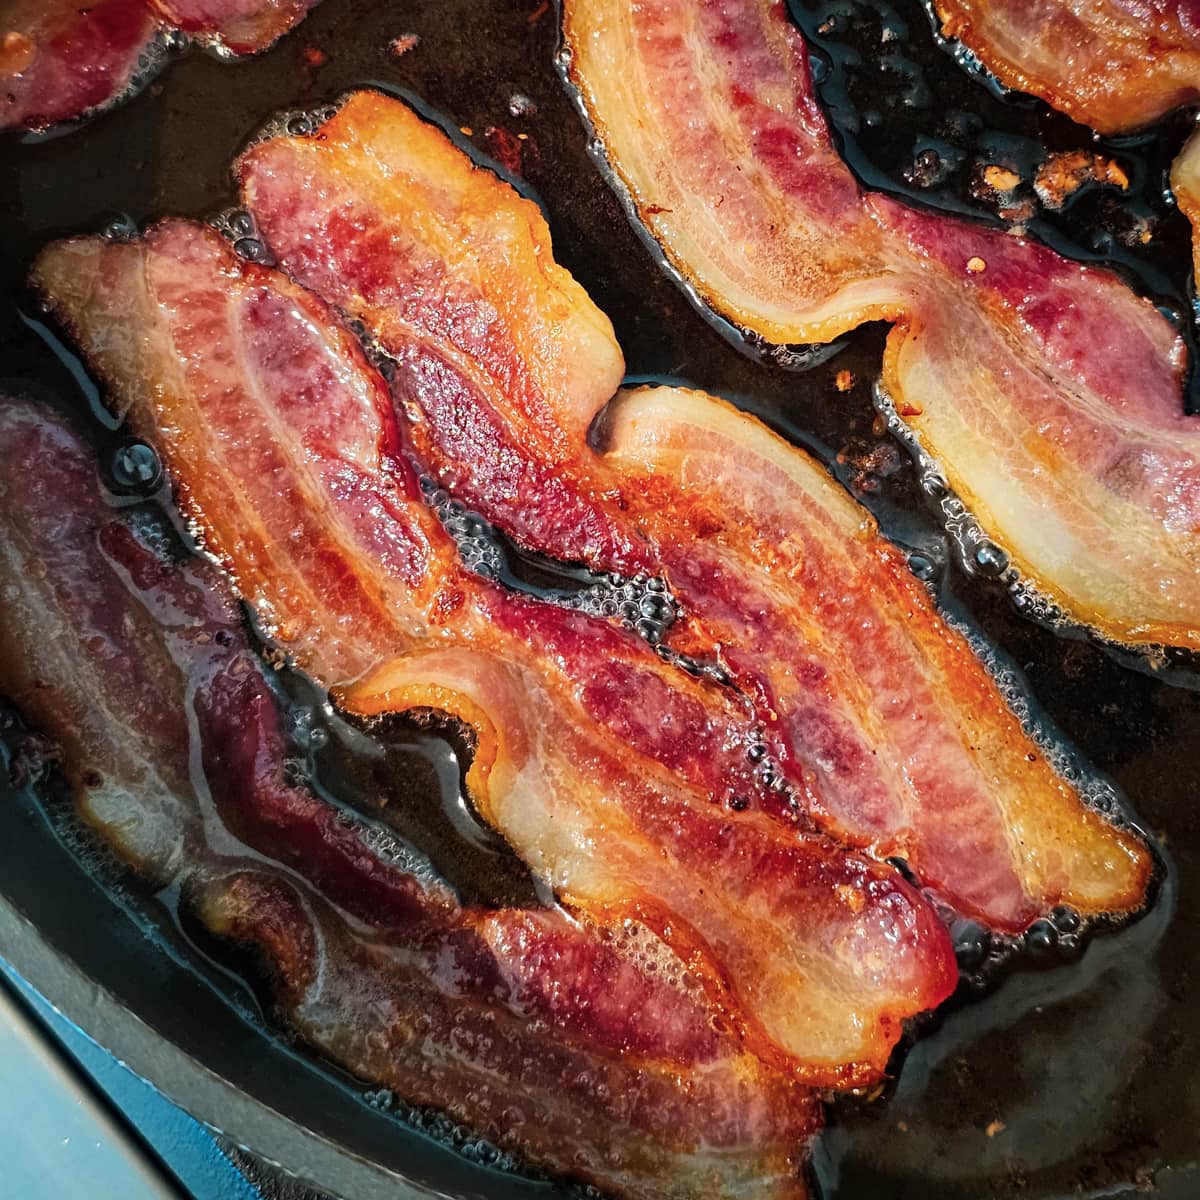 Bacon frying in a skillet.